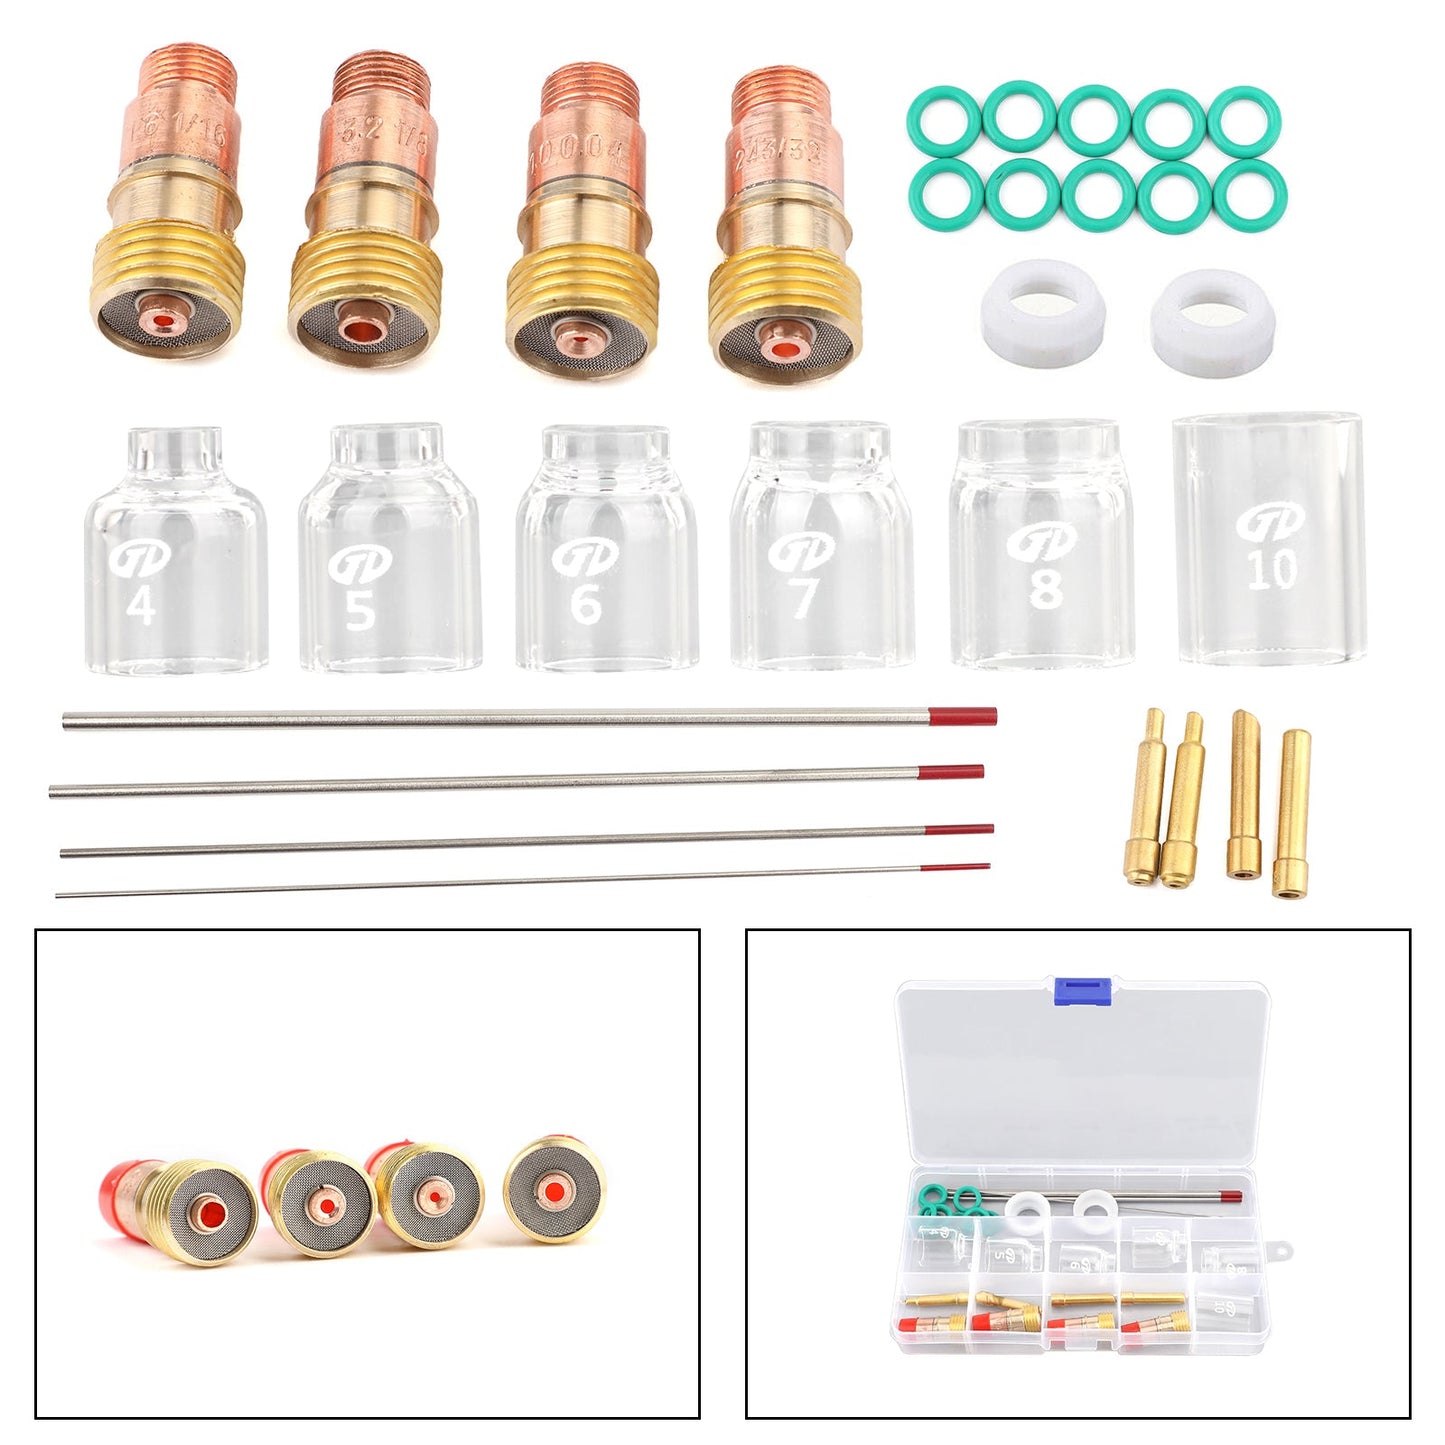 30Pcs TIG Welding Stubby Gas Lens Pyrex Cup Kit Fits For Tig WP-17/18/26 Torch